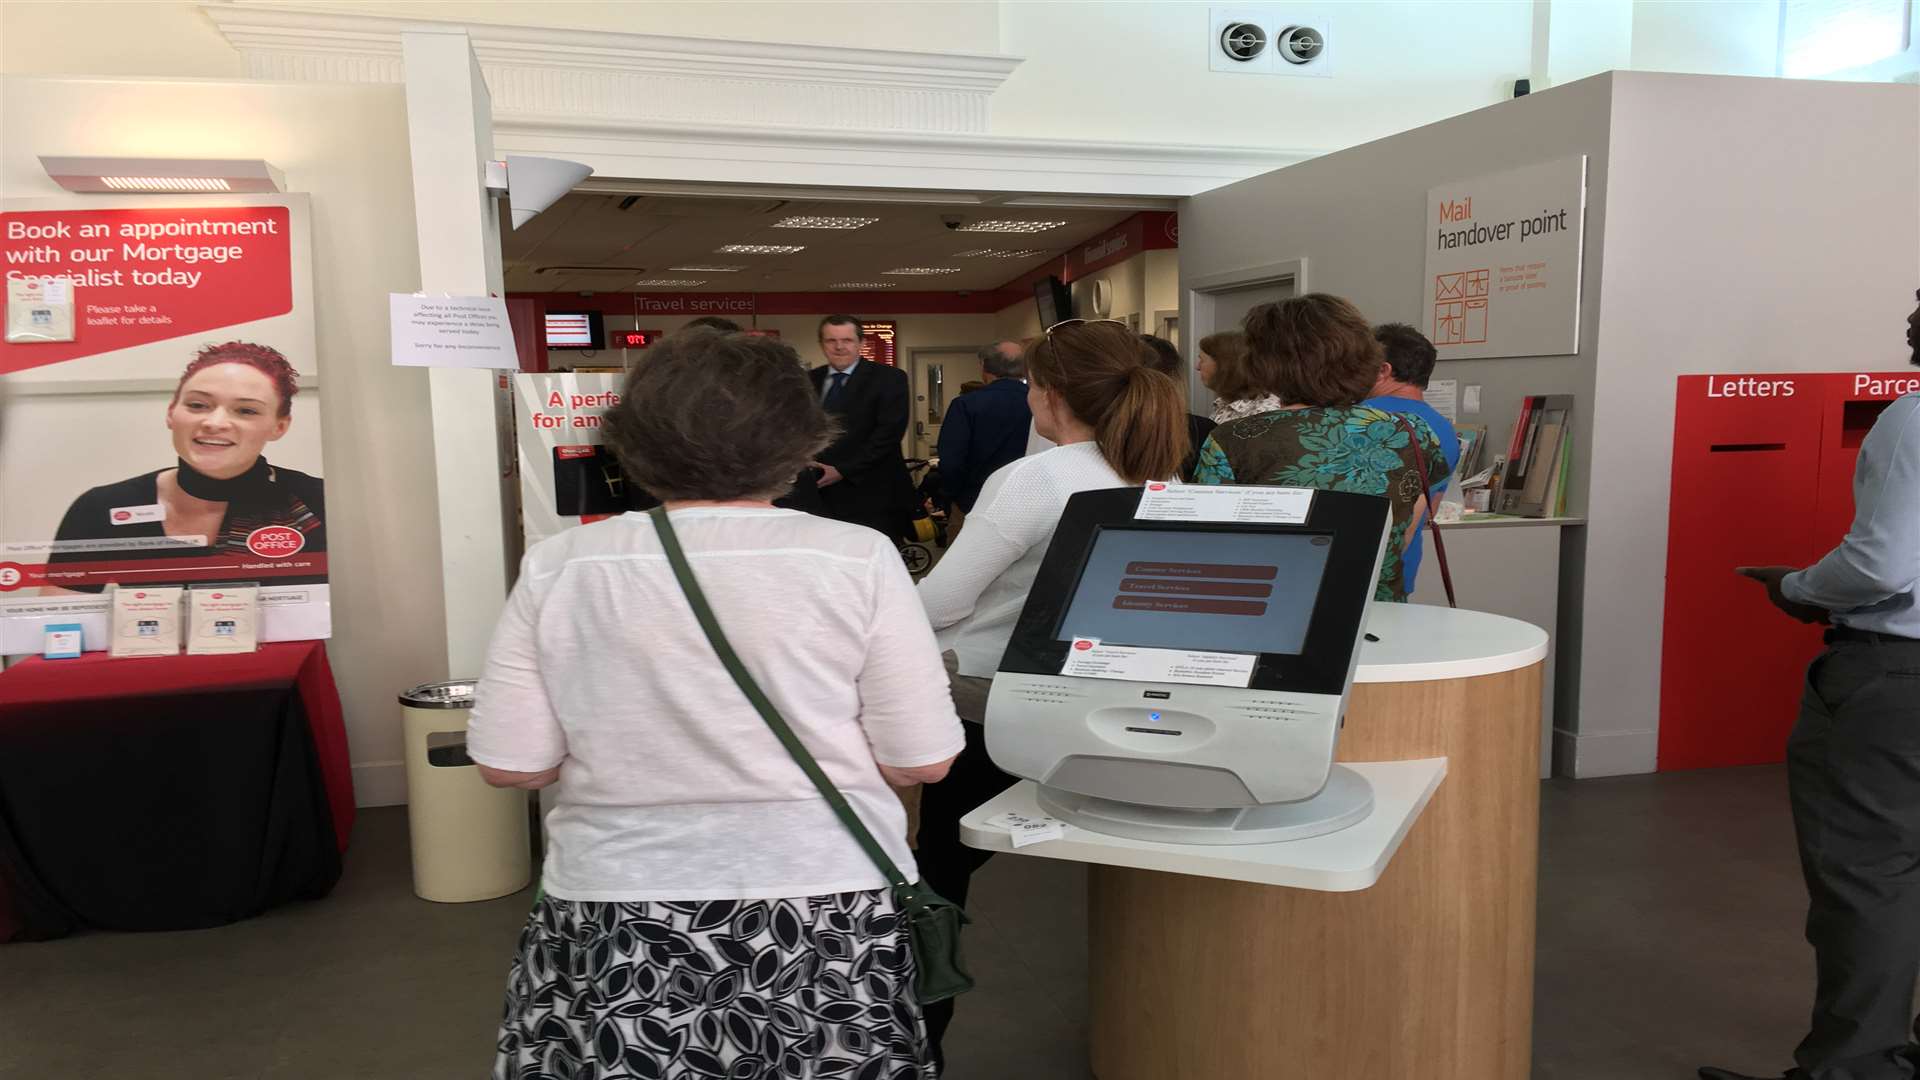 Customers queuing in the Maidstone branch